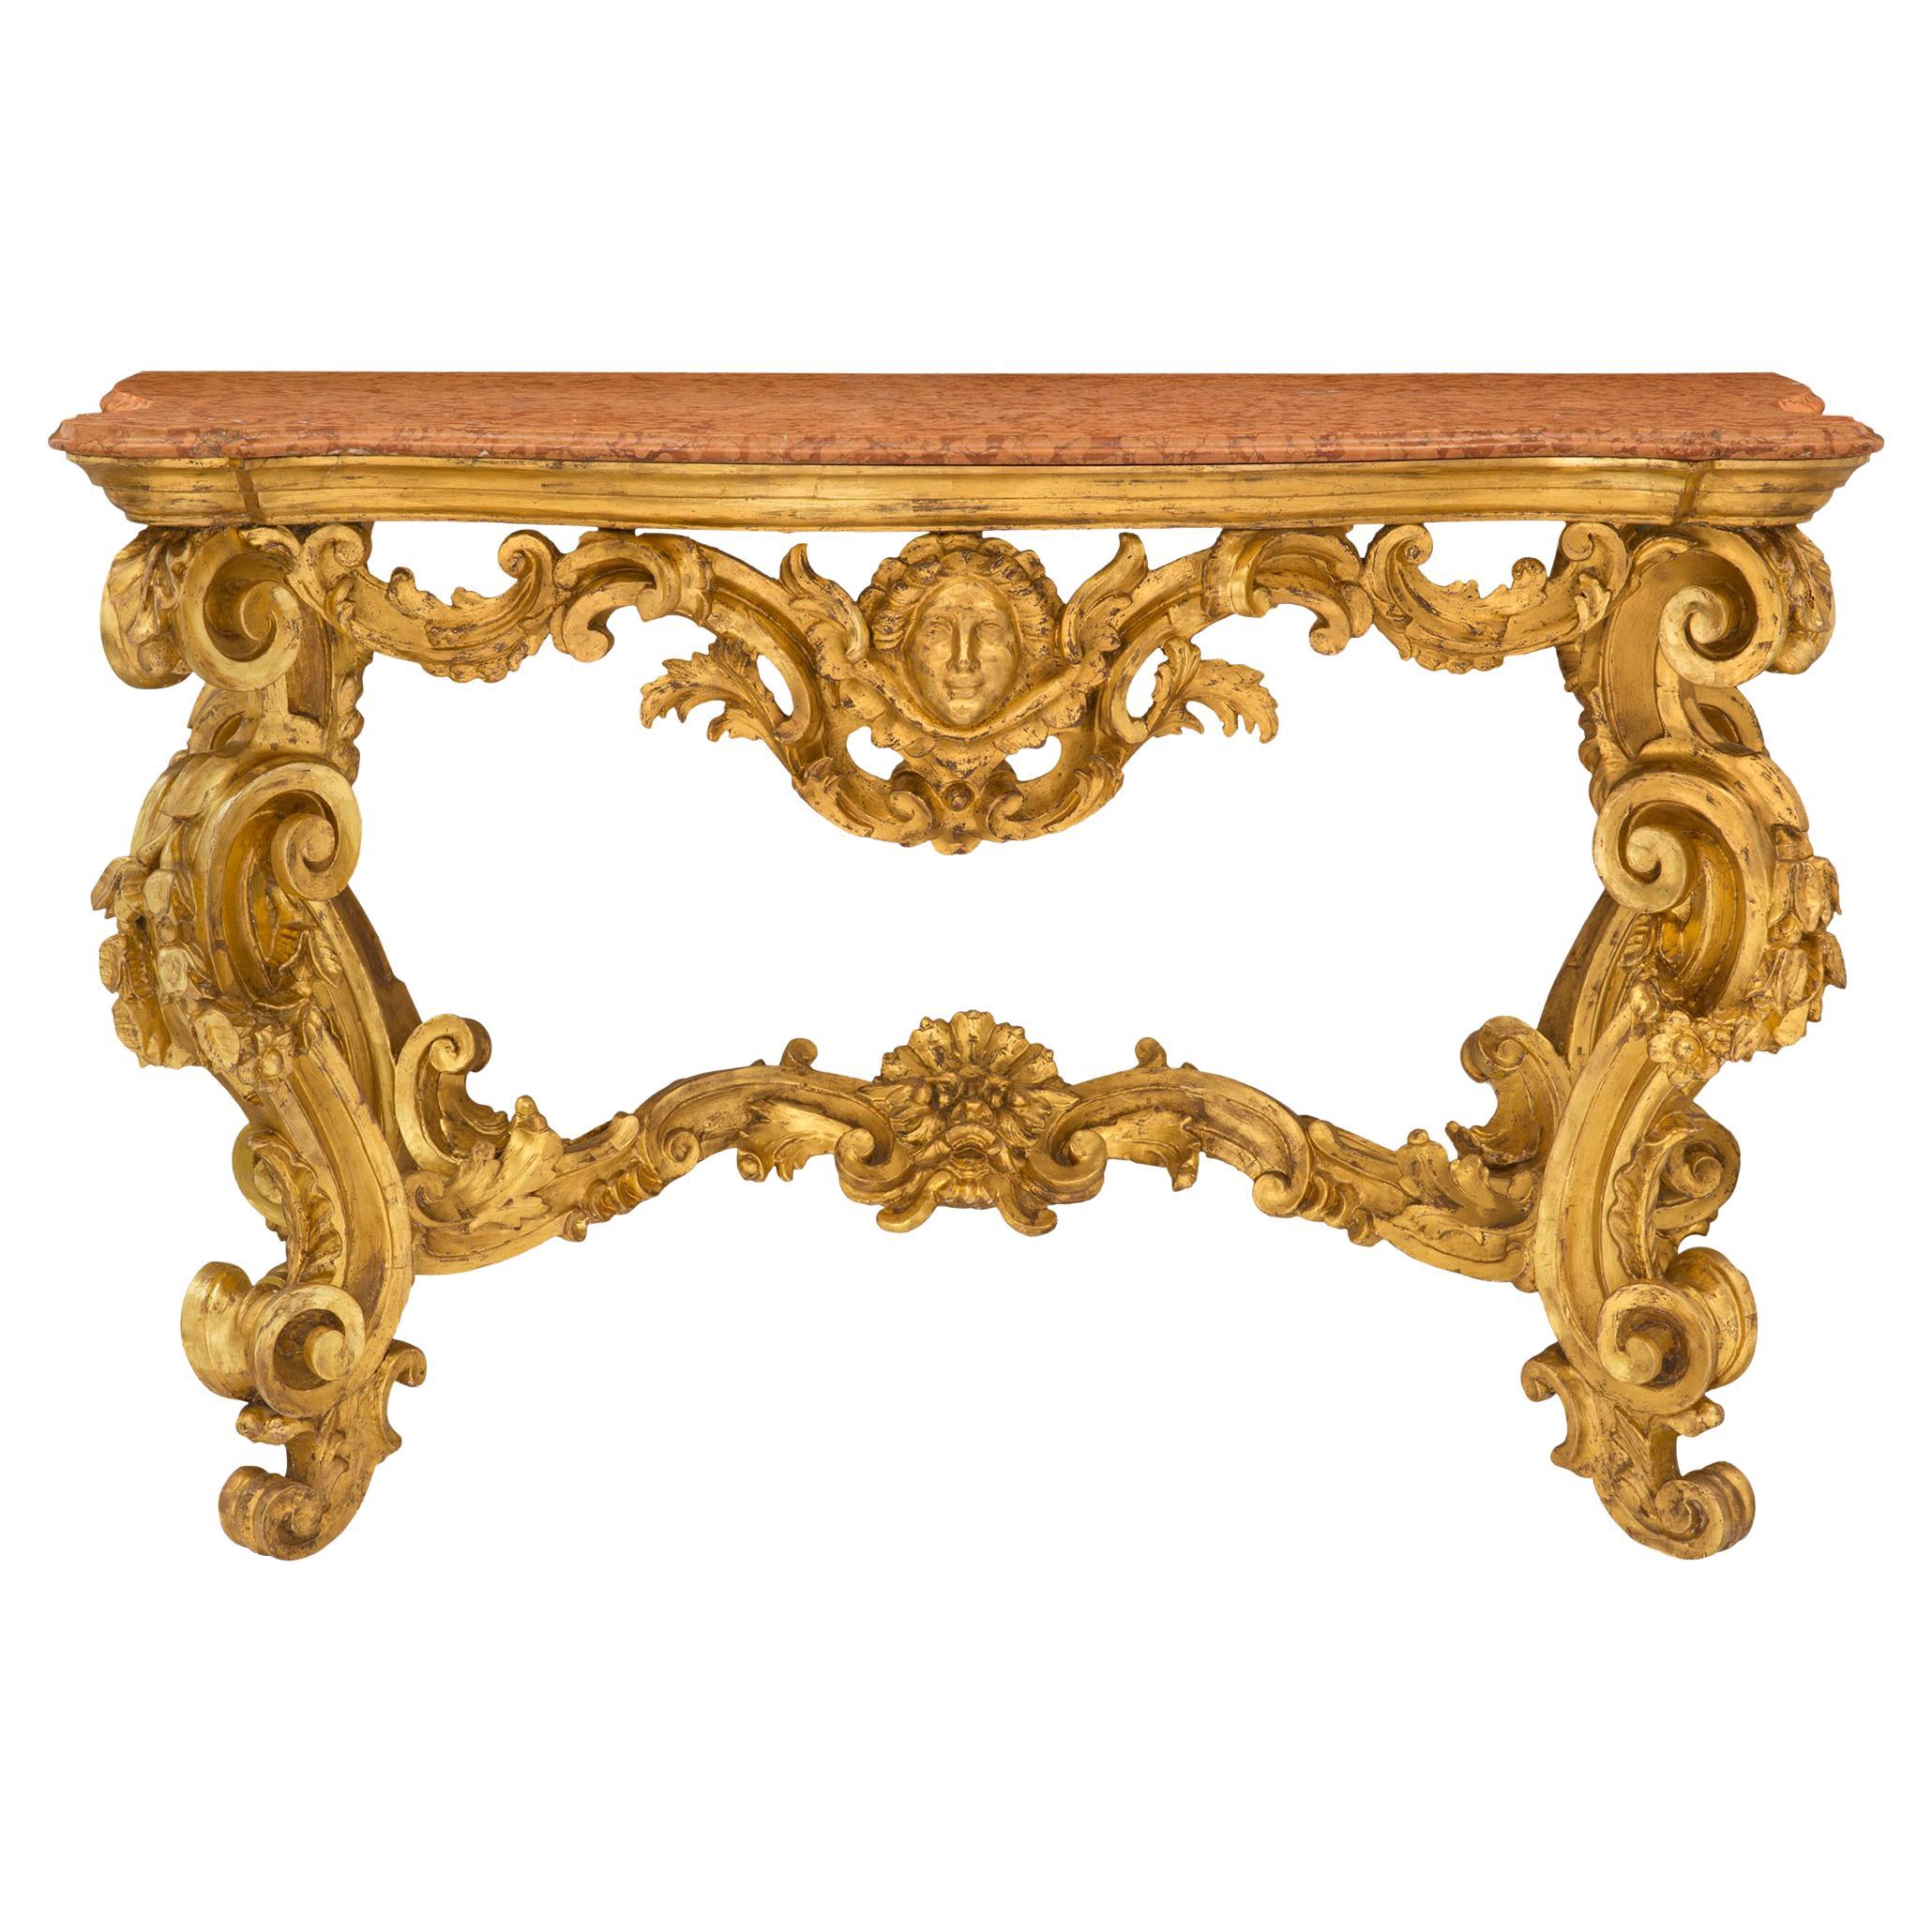 Italian Mid-18th Century Giltwood and Rosso Verona Marble Console